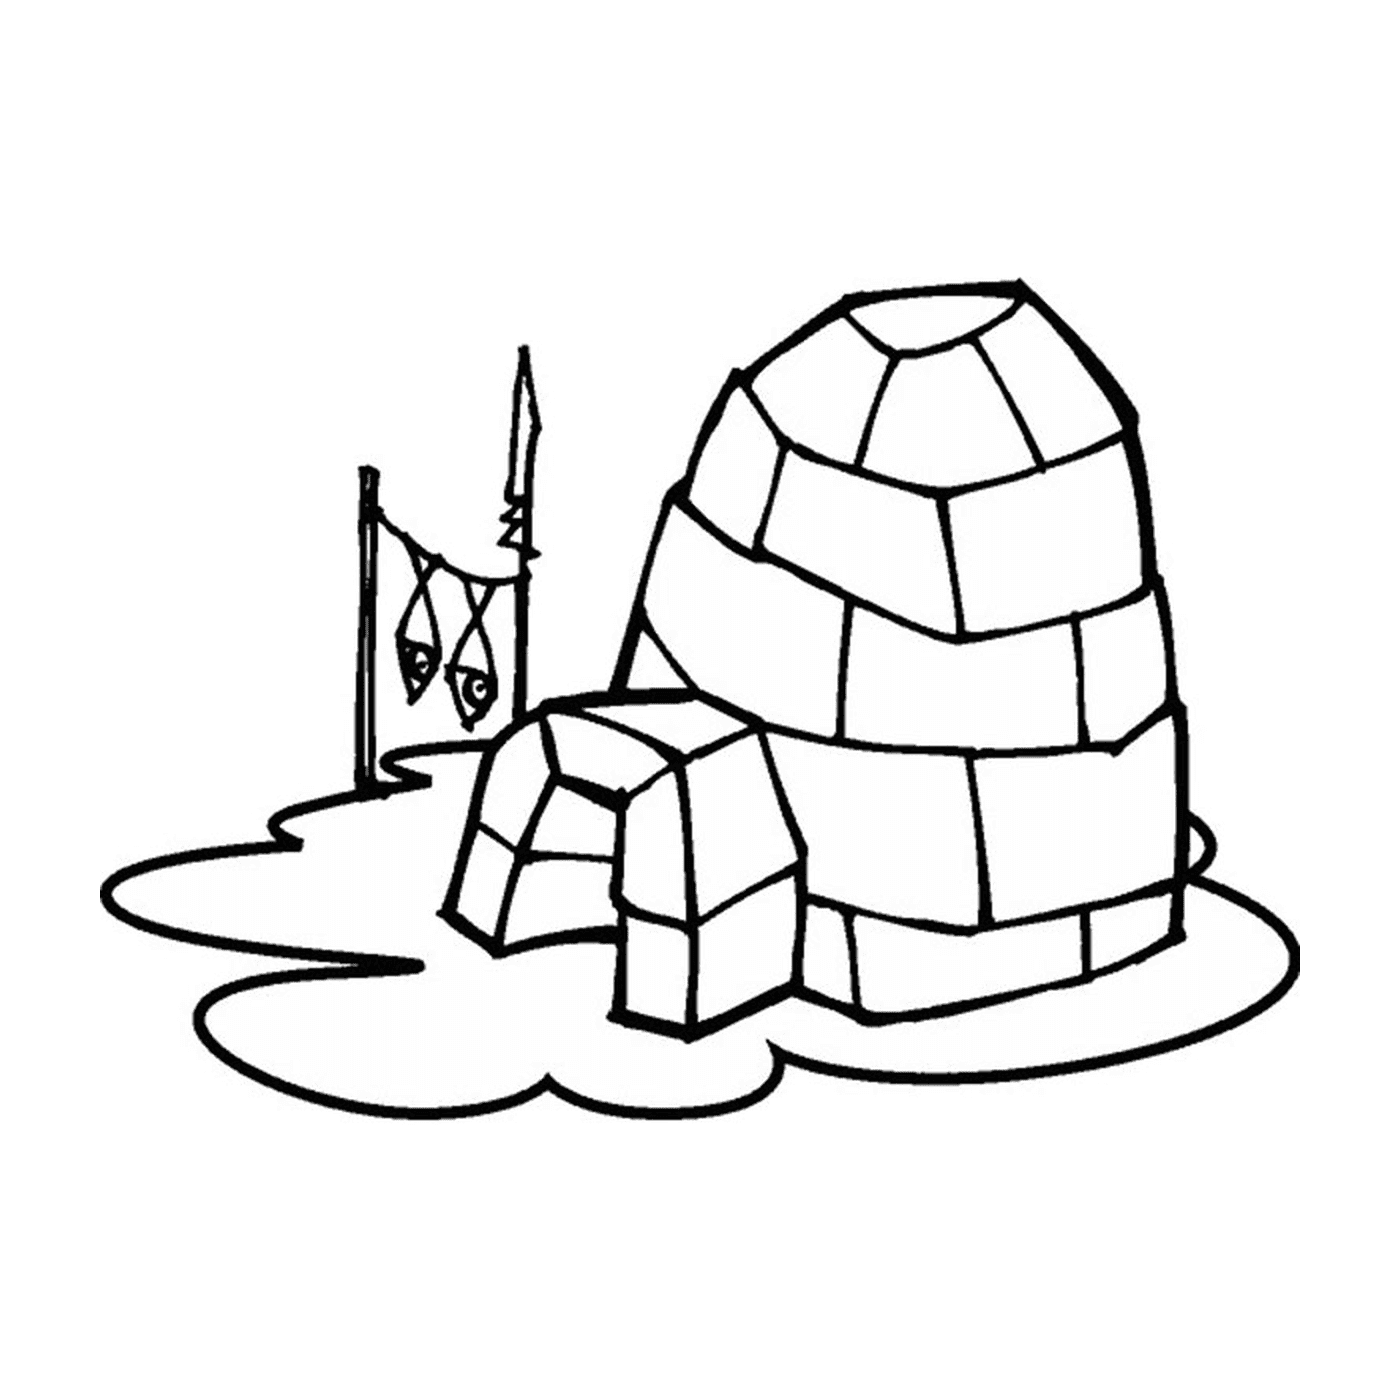 coloriage igloo poissons seches